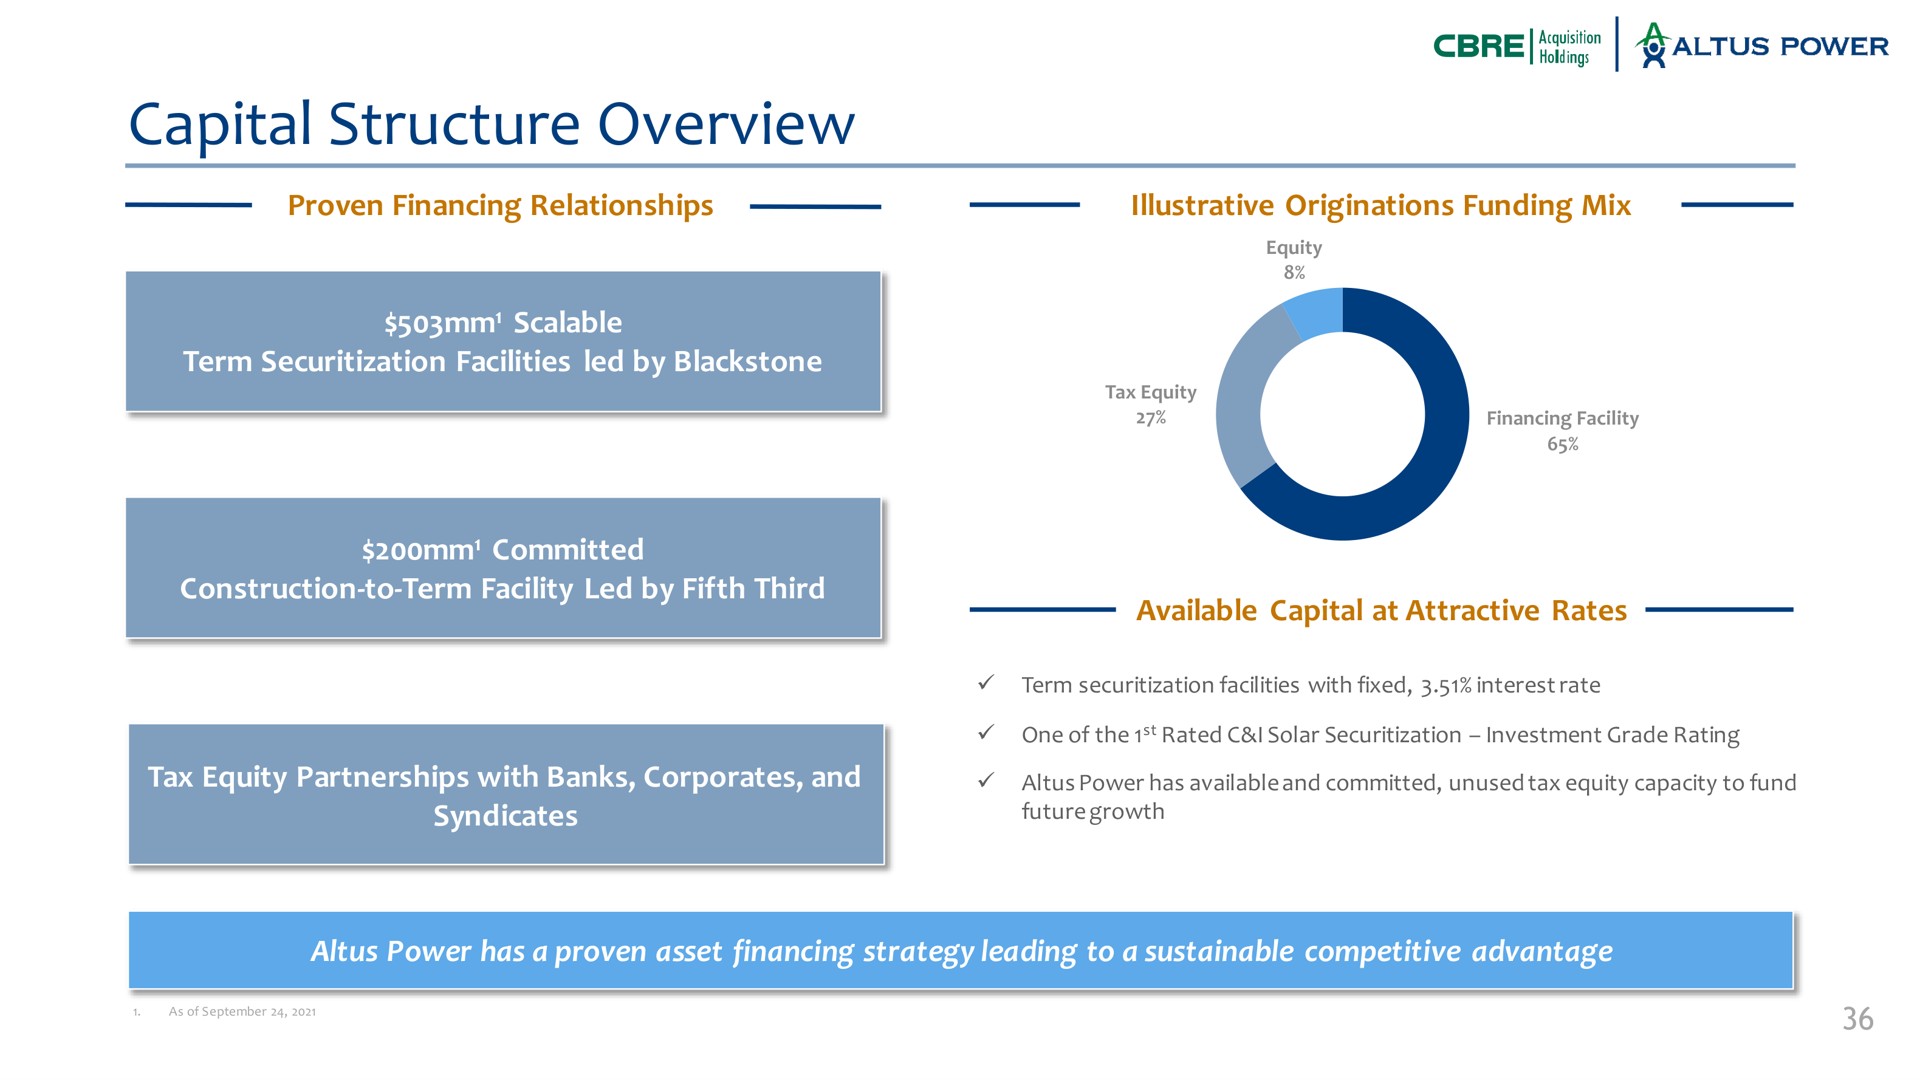 capital structure overview proven financing relationships illustrative originations funding mix power scalable term facilities led by committed construction to term facility led by fifth third tax equity partnerships with banks and syndicates available at attractive rates power has a proven asset financing strategy leading to a sustainable competitive advantage | Altus Power